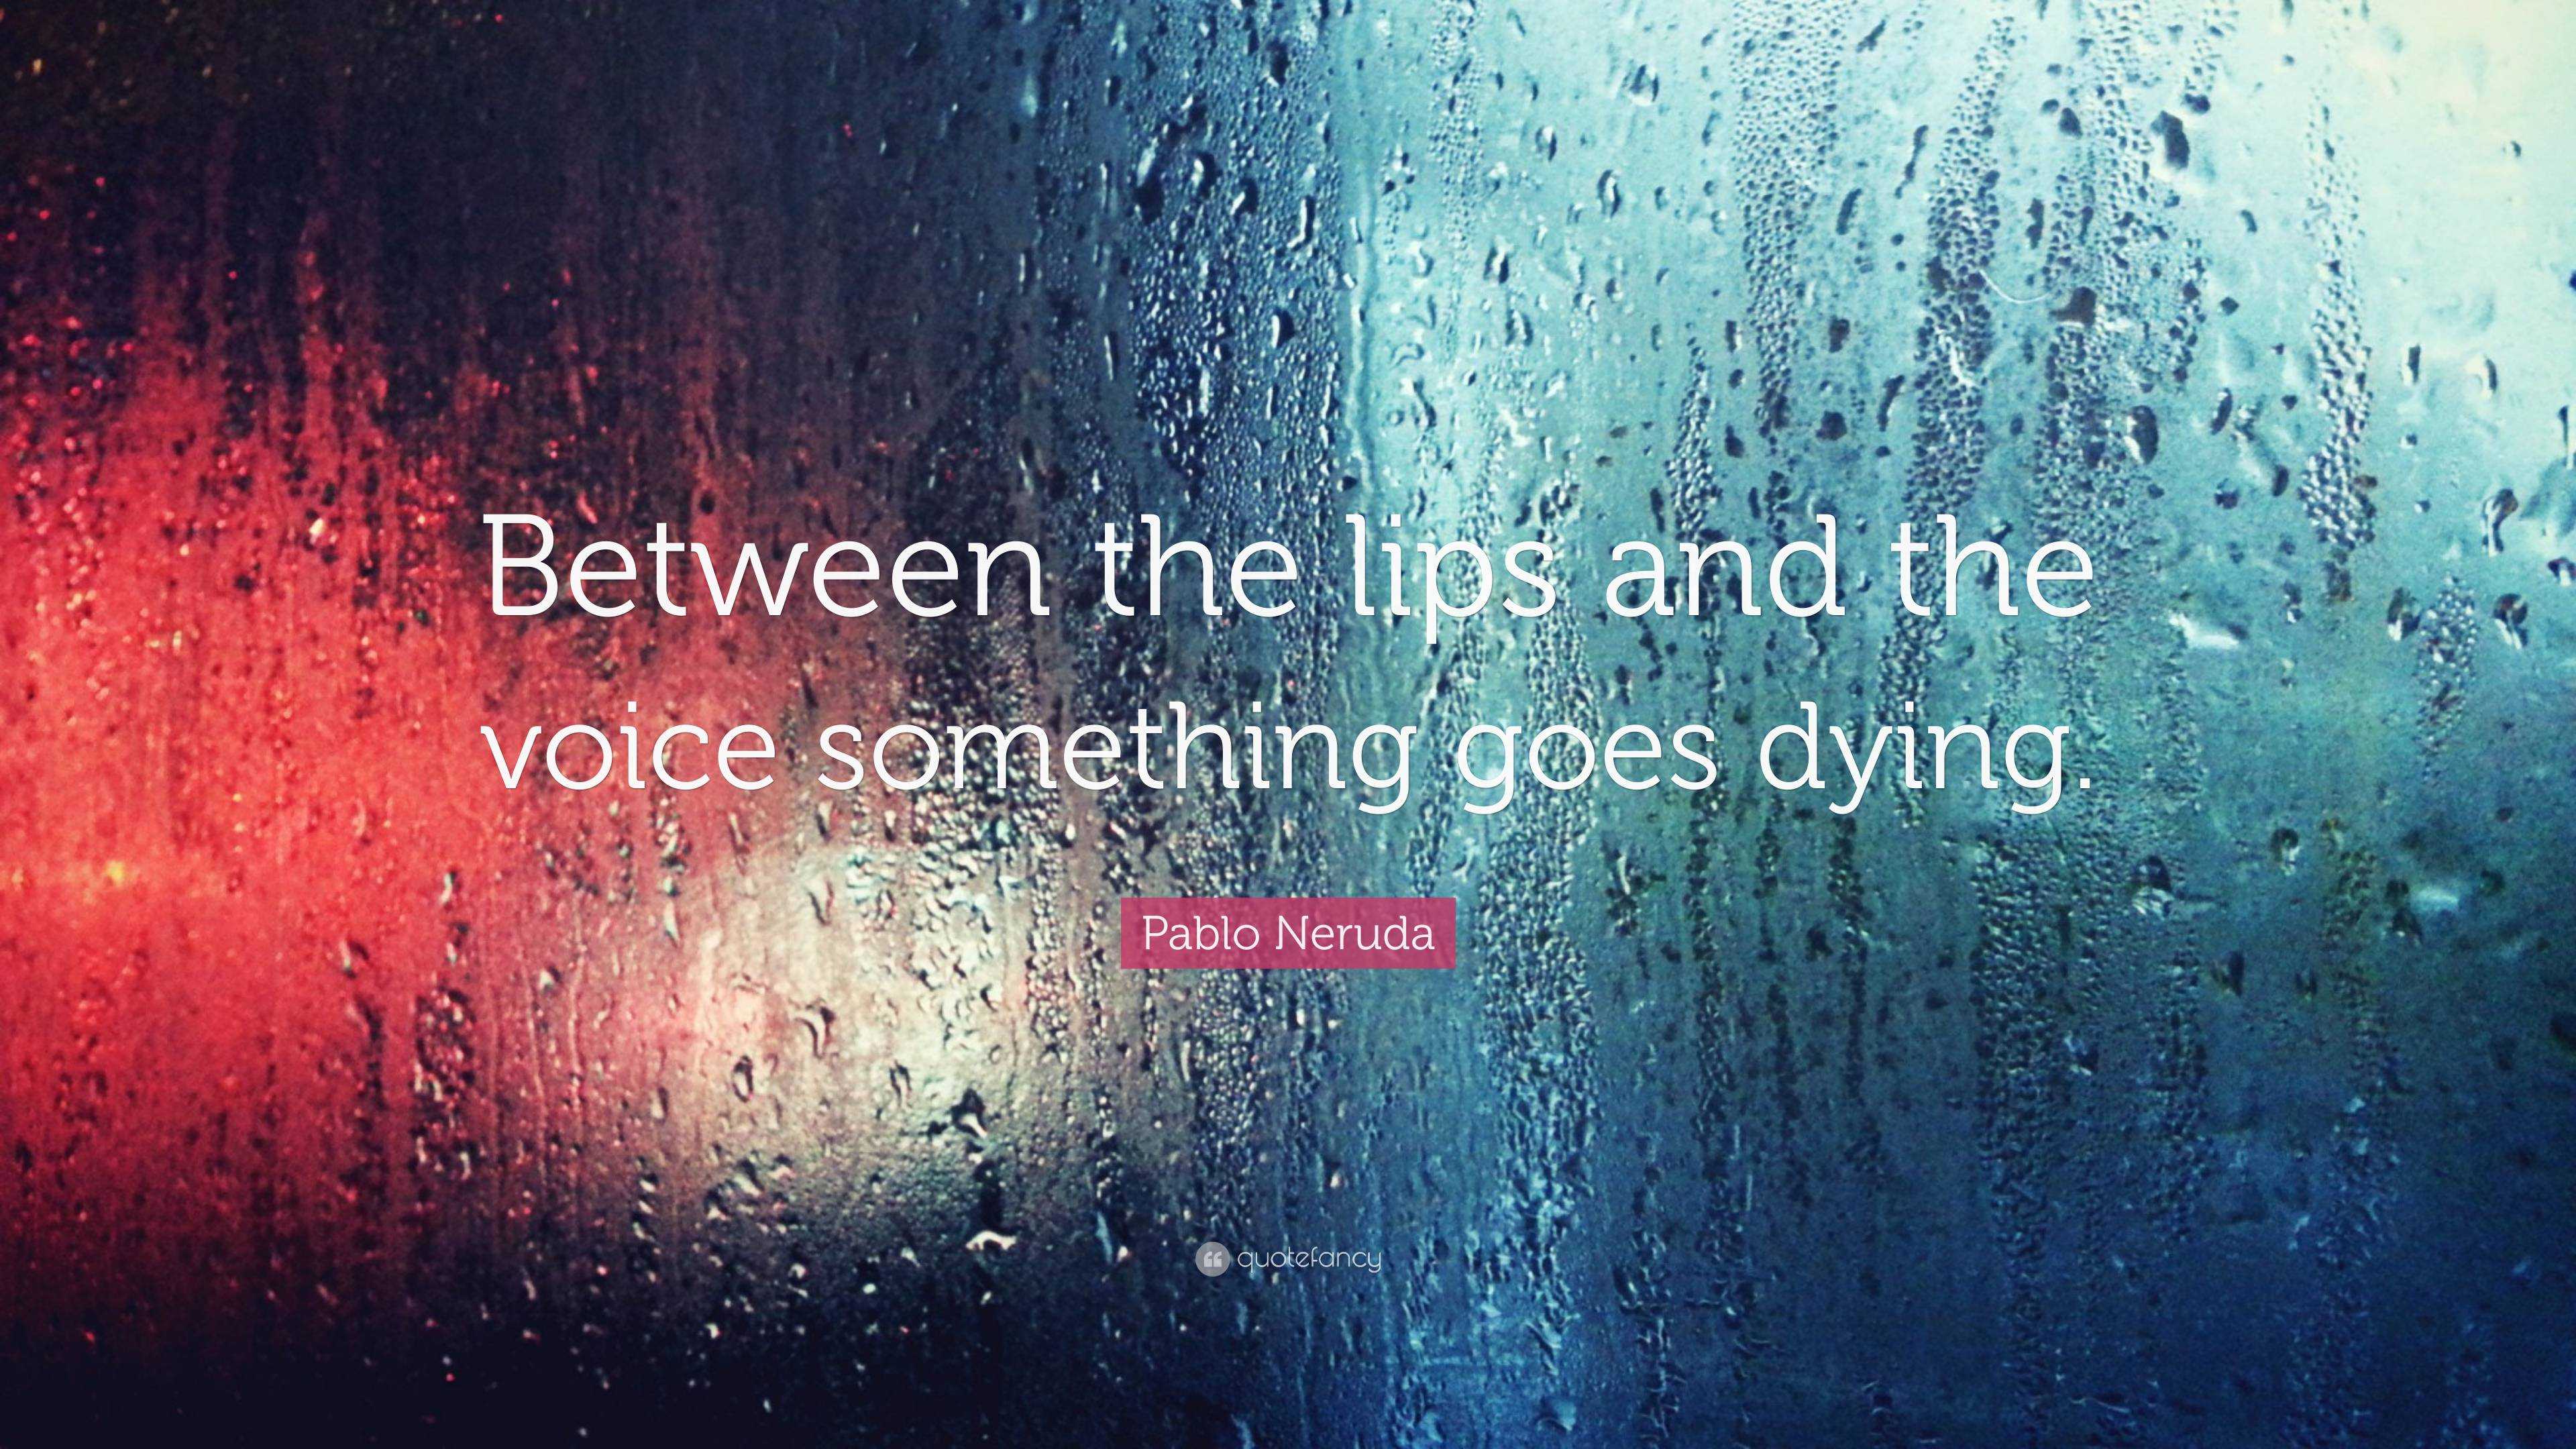 Pablo Neruda Quote: “Between the lips and the voice something goes dying.”